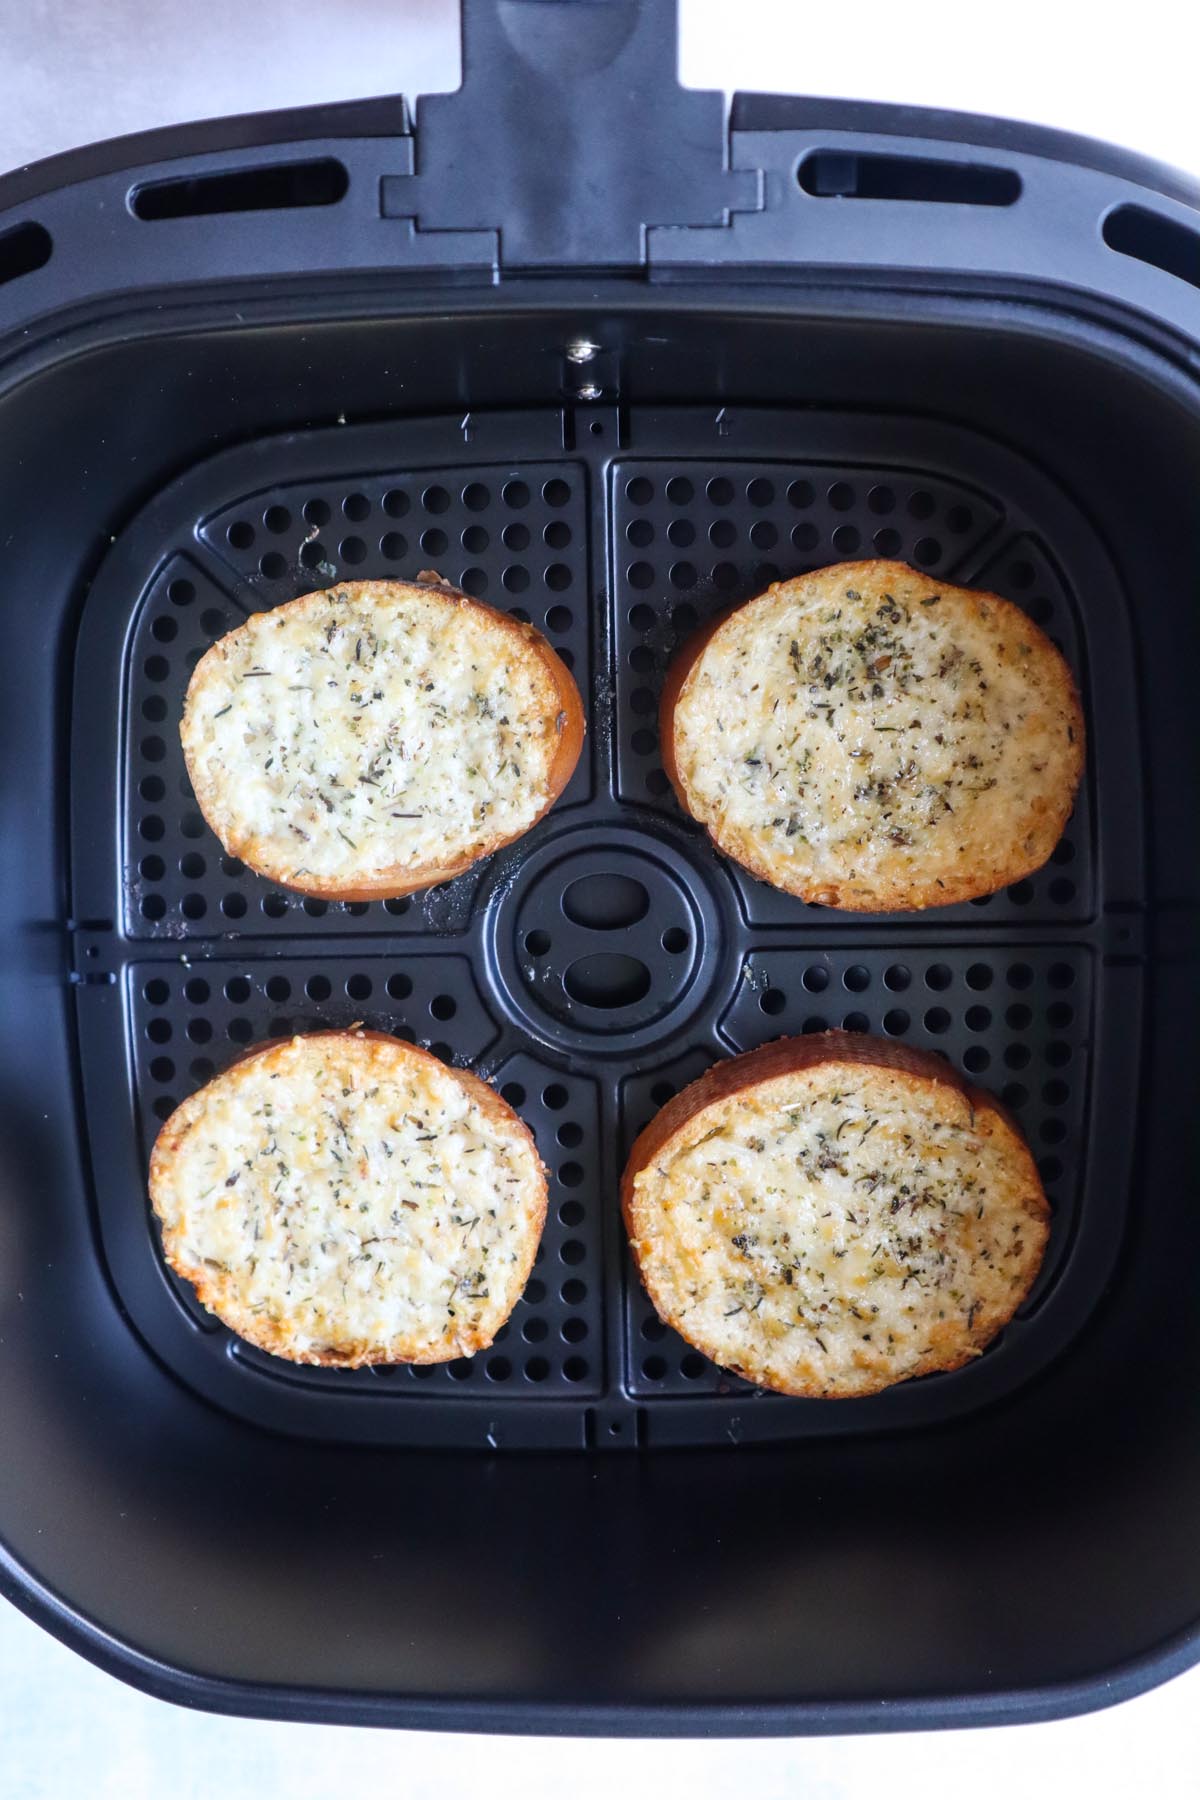 air fryer with four slices of cheese toast right after it's been cooked and the cheese is melted